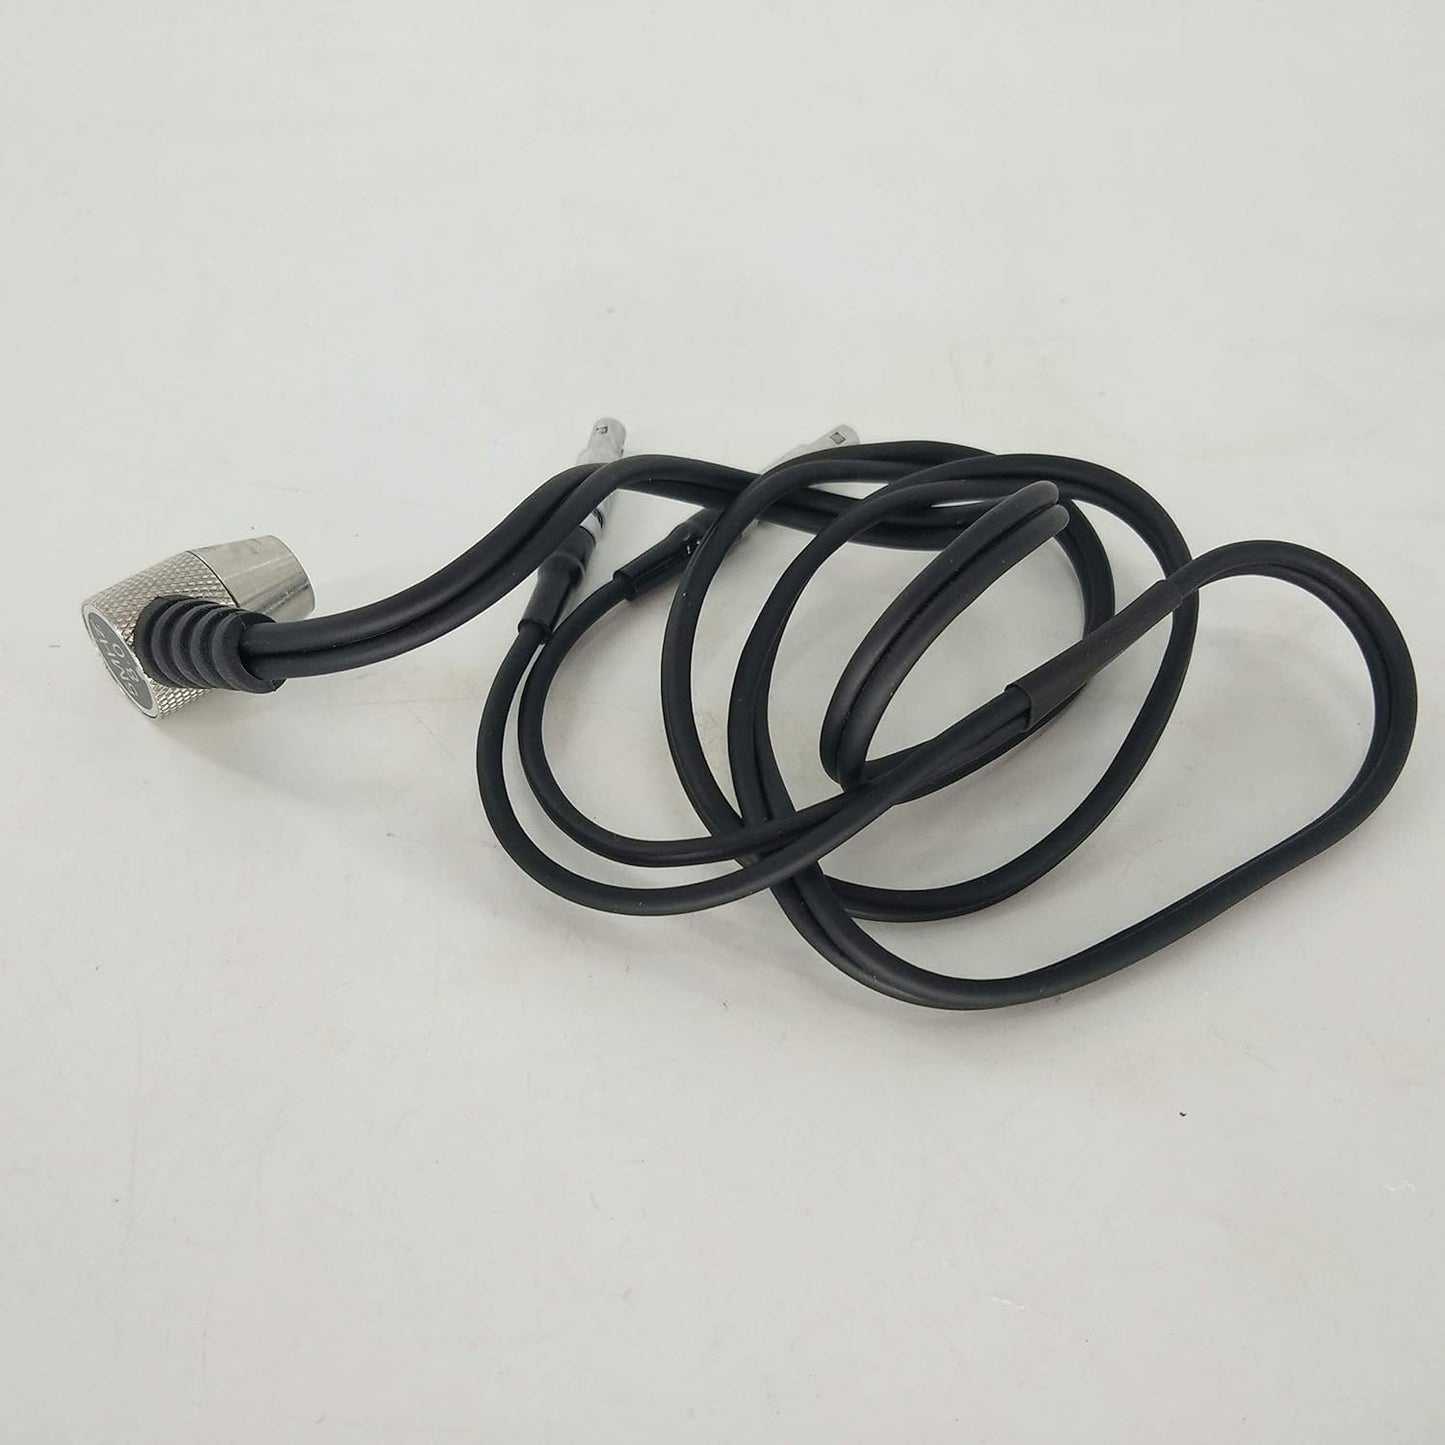 VTSYIQI Ultrasonic Thickness Gauge Probe Transducer Collection for TM-8812 Ultrasonic Thickness Monitor